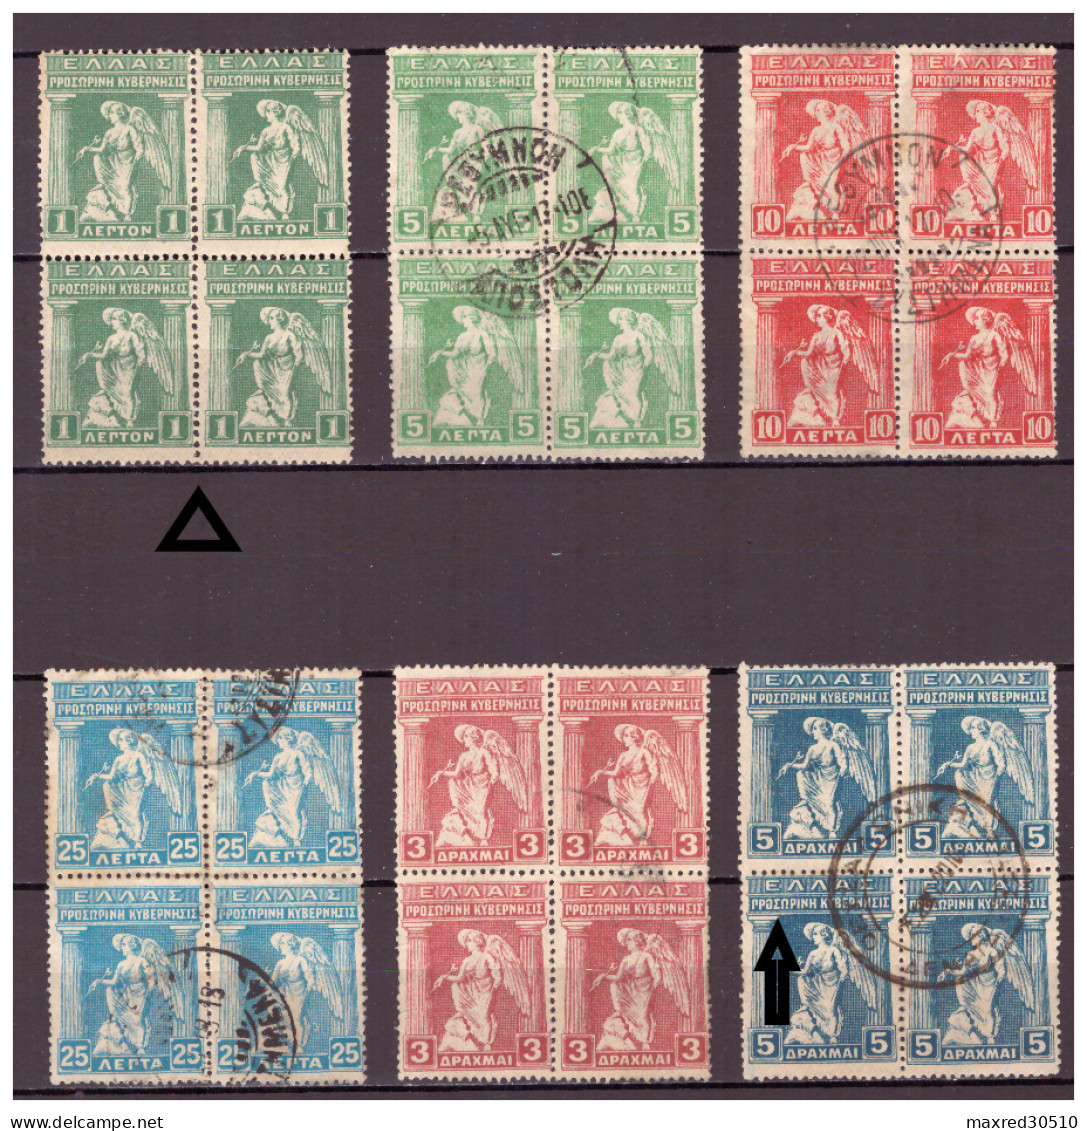 GREECE 1917 6 BLOCKS OF 4 OF THE "PROVISIONAL GOVERNMENT ISSUE", AT THE BL.4 OF 5DR. SEE ARROW AT THE "O", USED - Usados